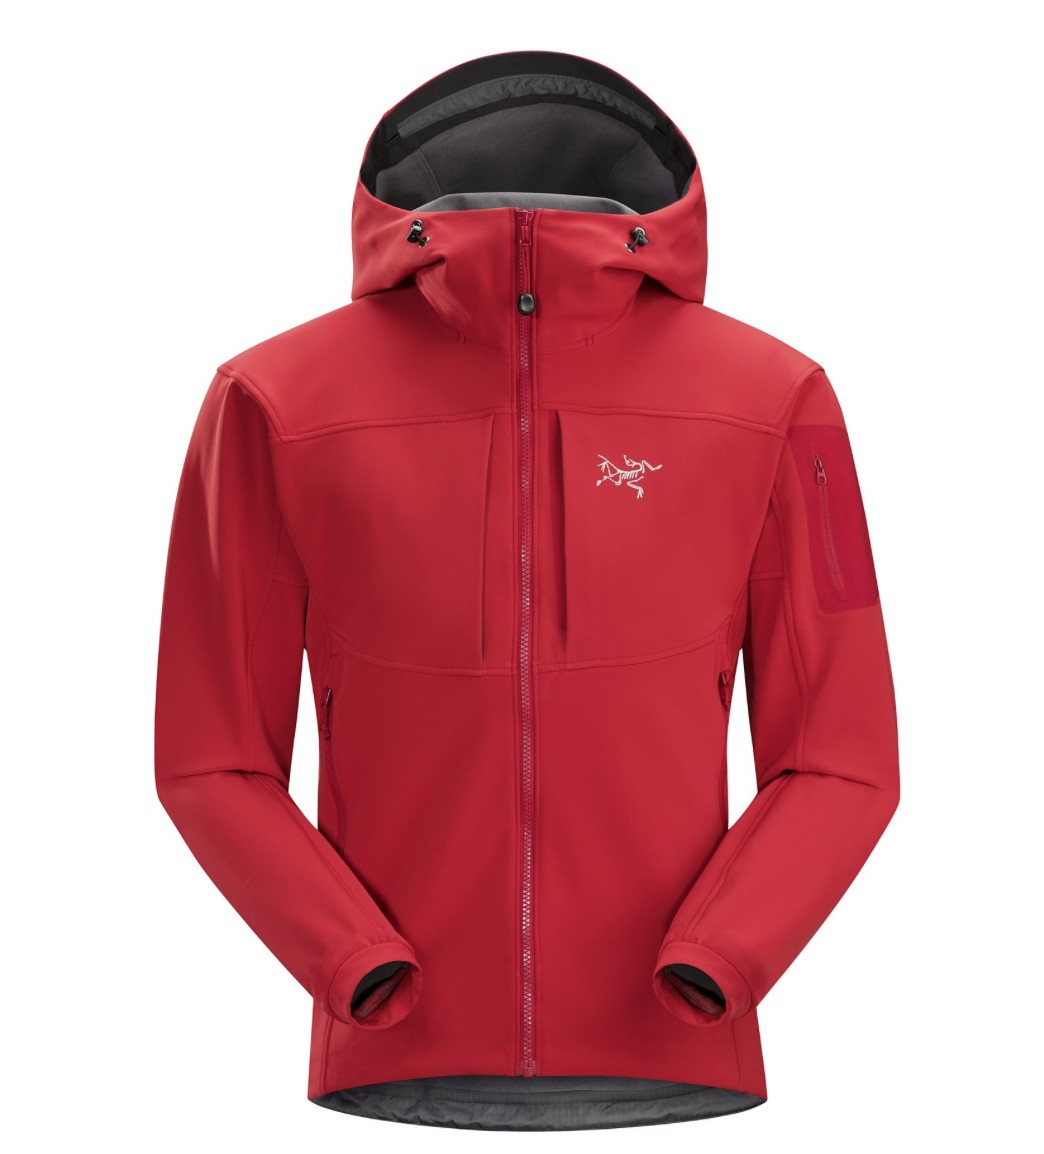 Arc'teryx Gamma MX Hoody Review | Tested & Rated